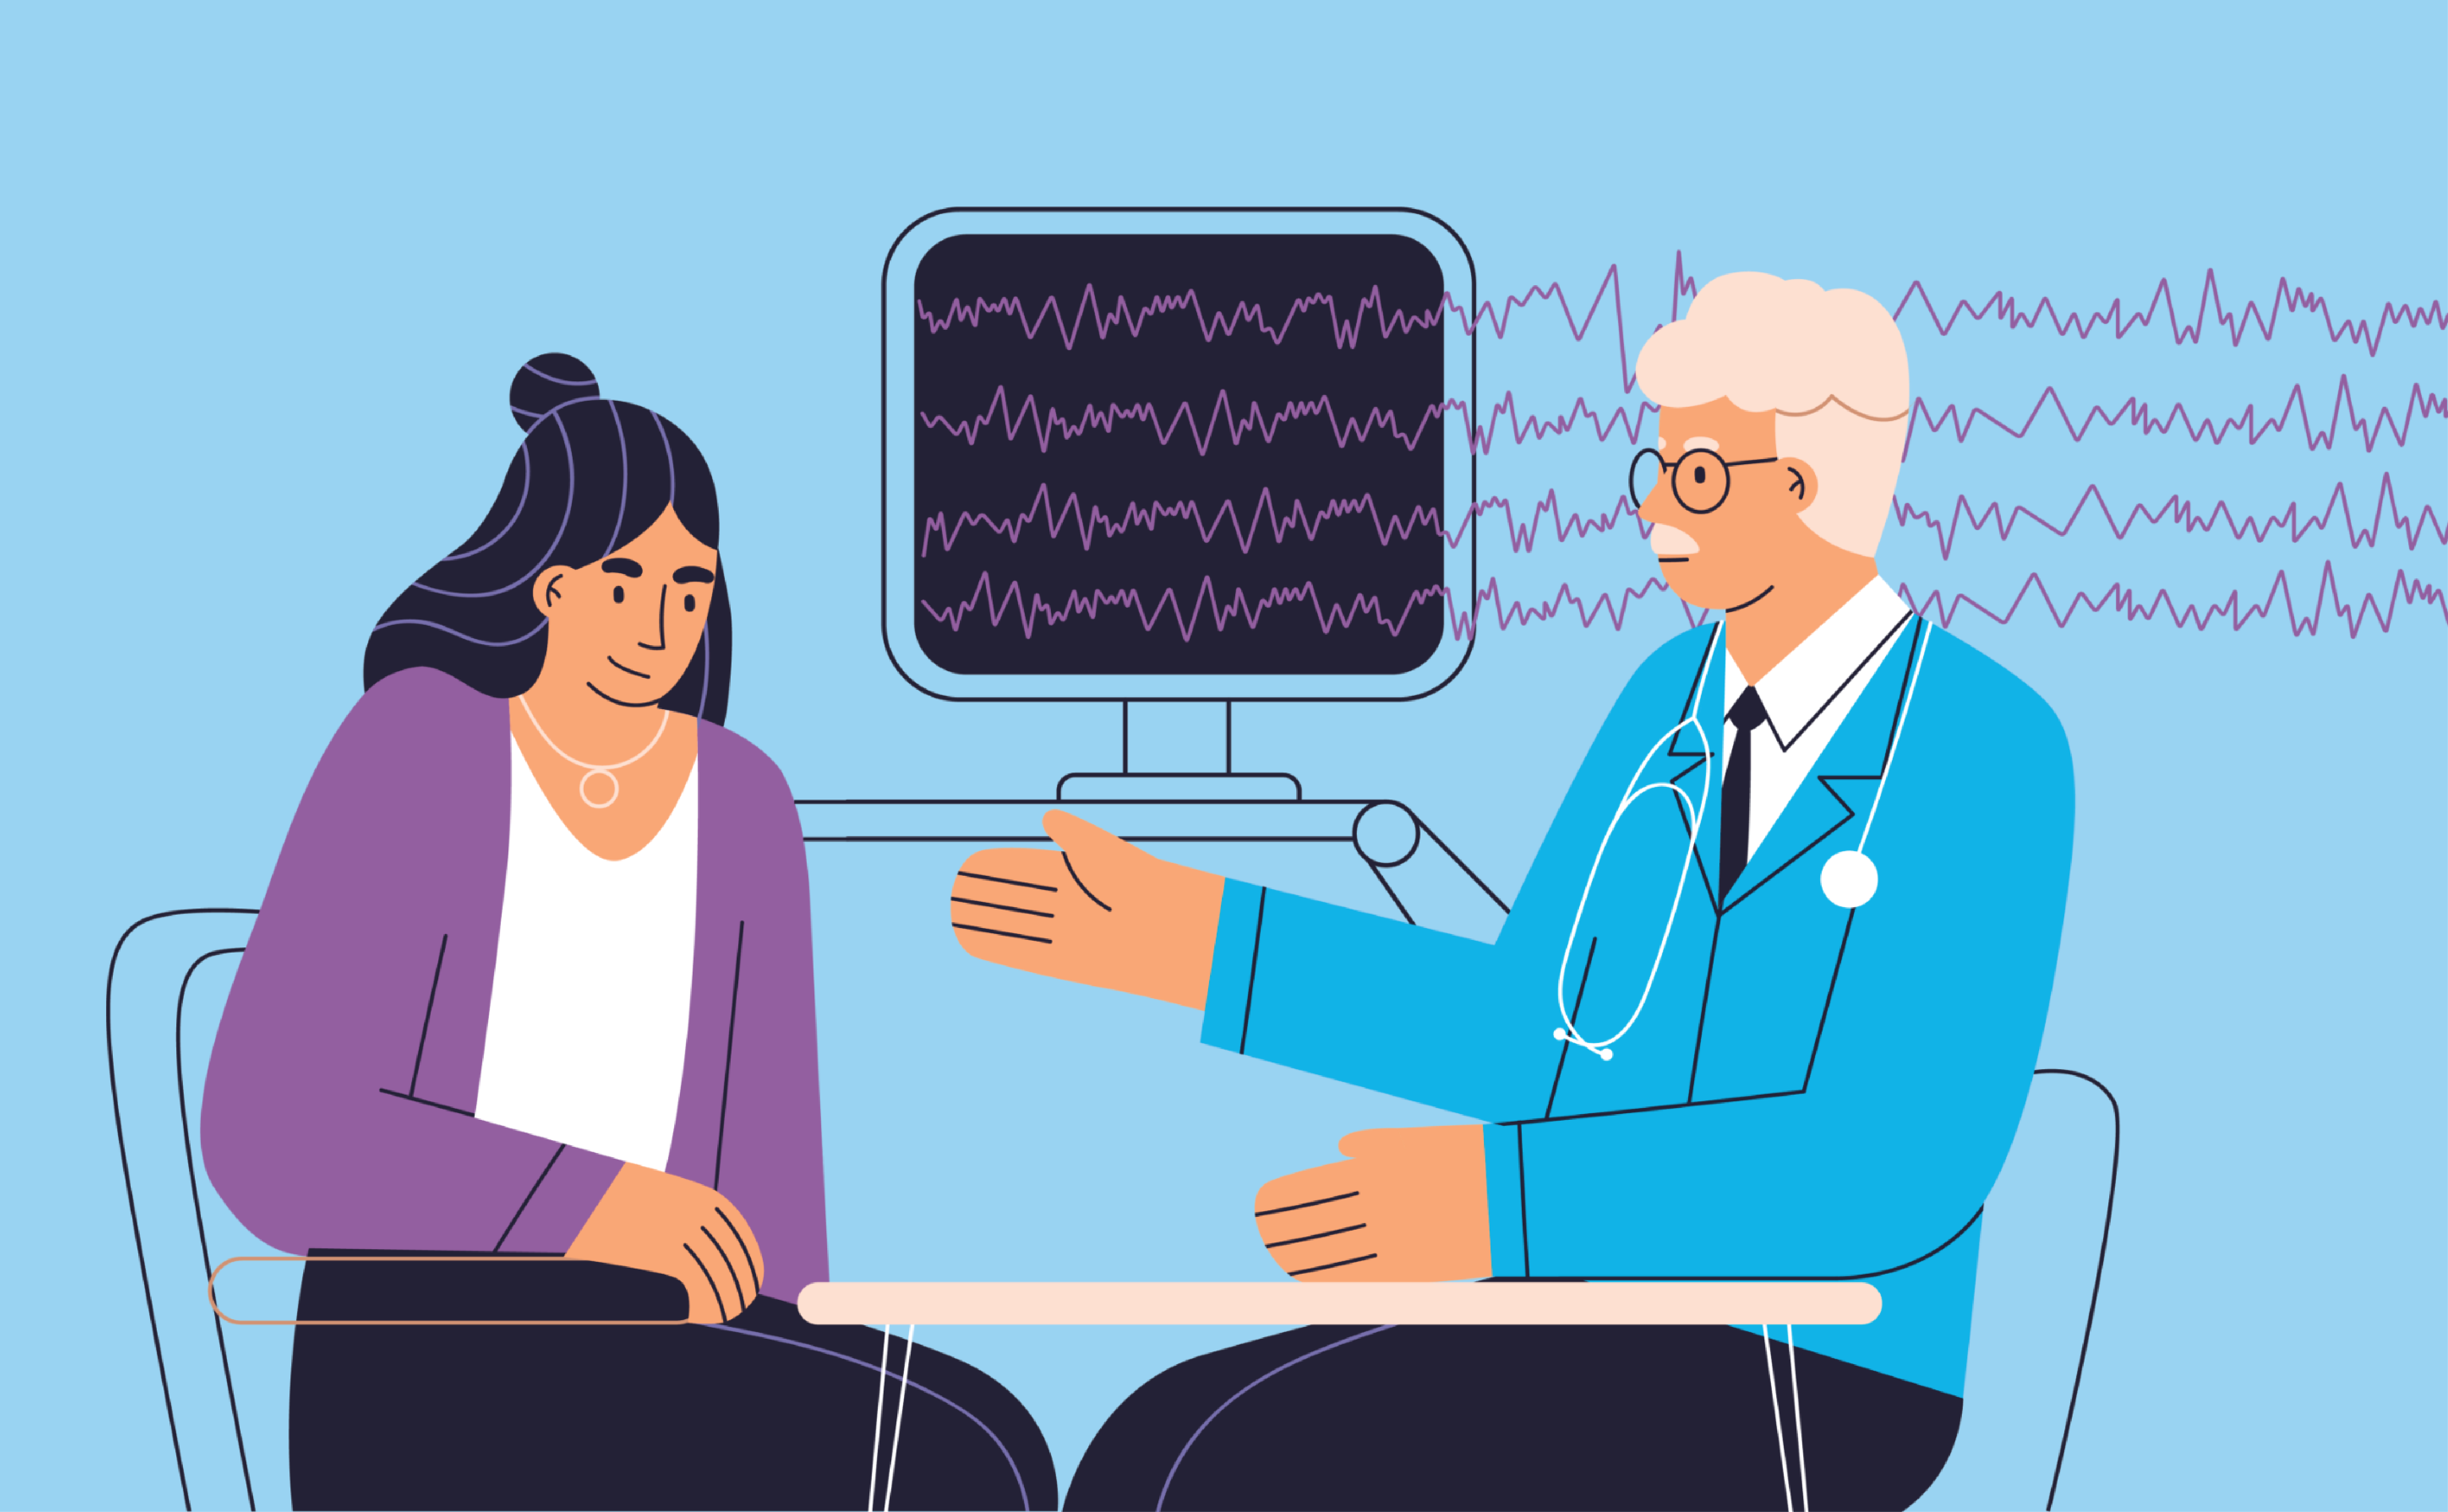 Illustration of a patient and doctor discussing test results